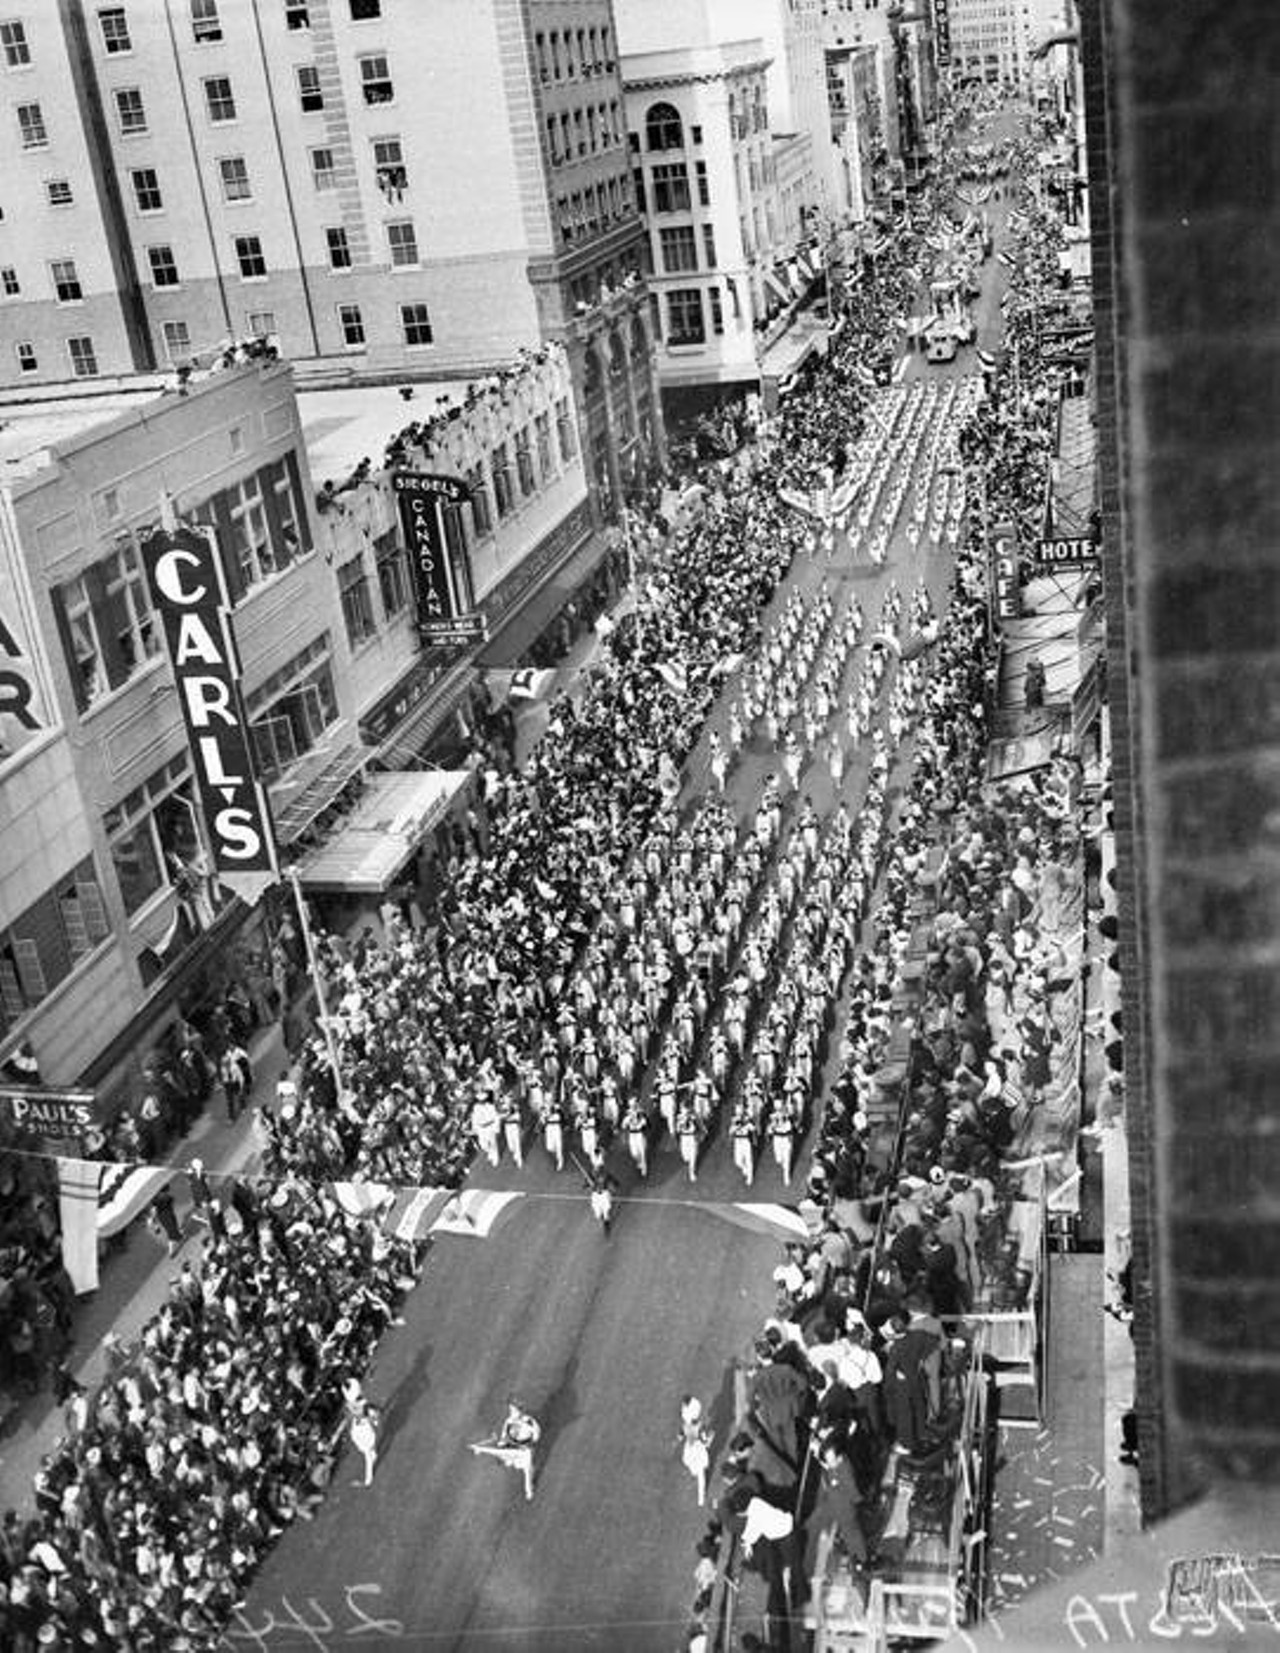 1940 Battle of Flowers Parade participants on Houston Street
An aerial view of the Battle of Flowers Parade coming down Houston Street.